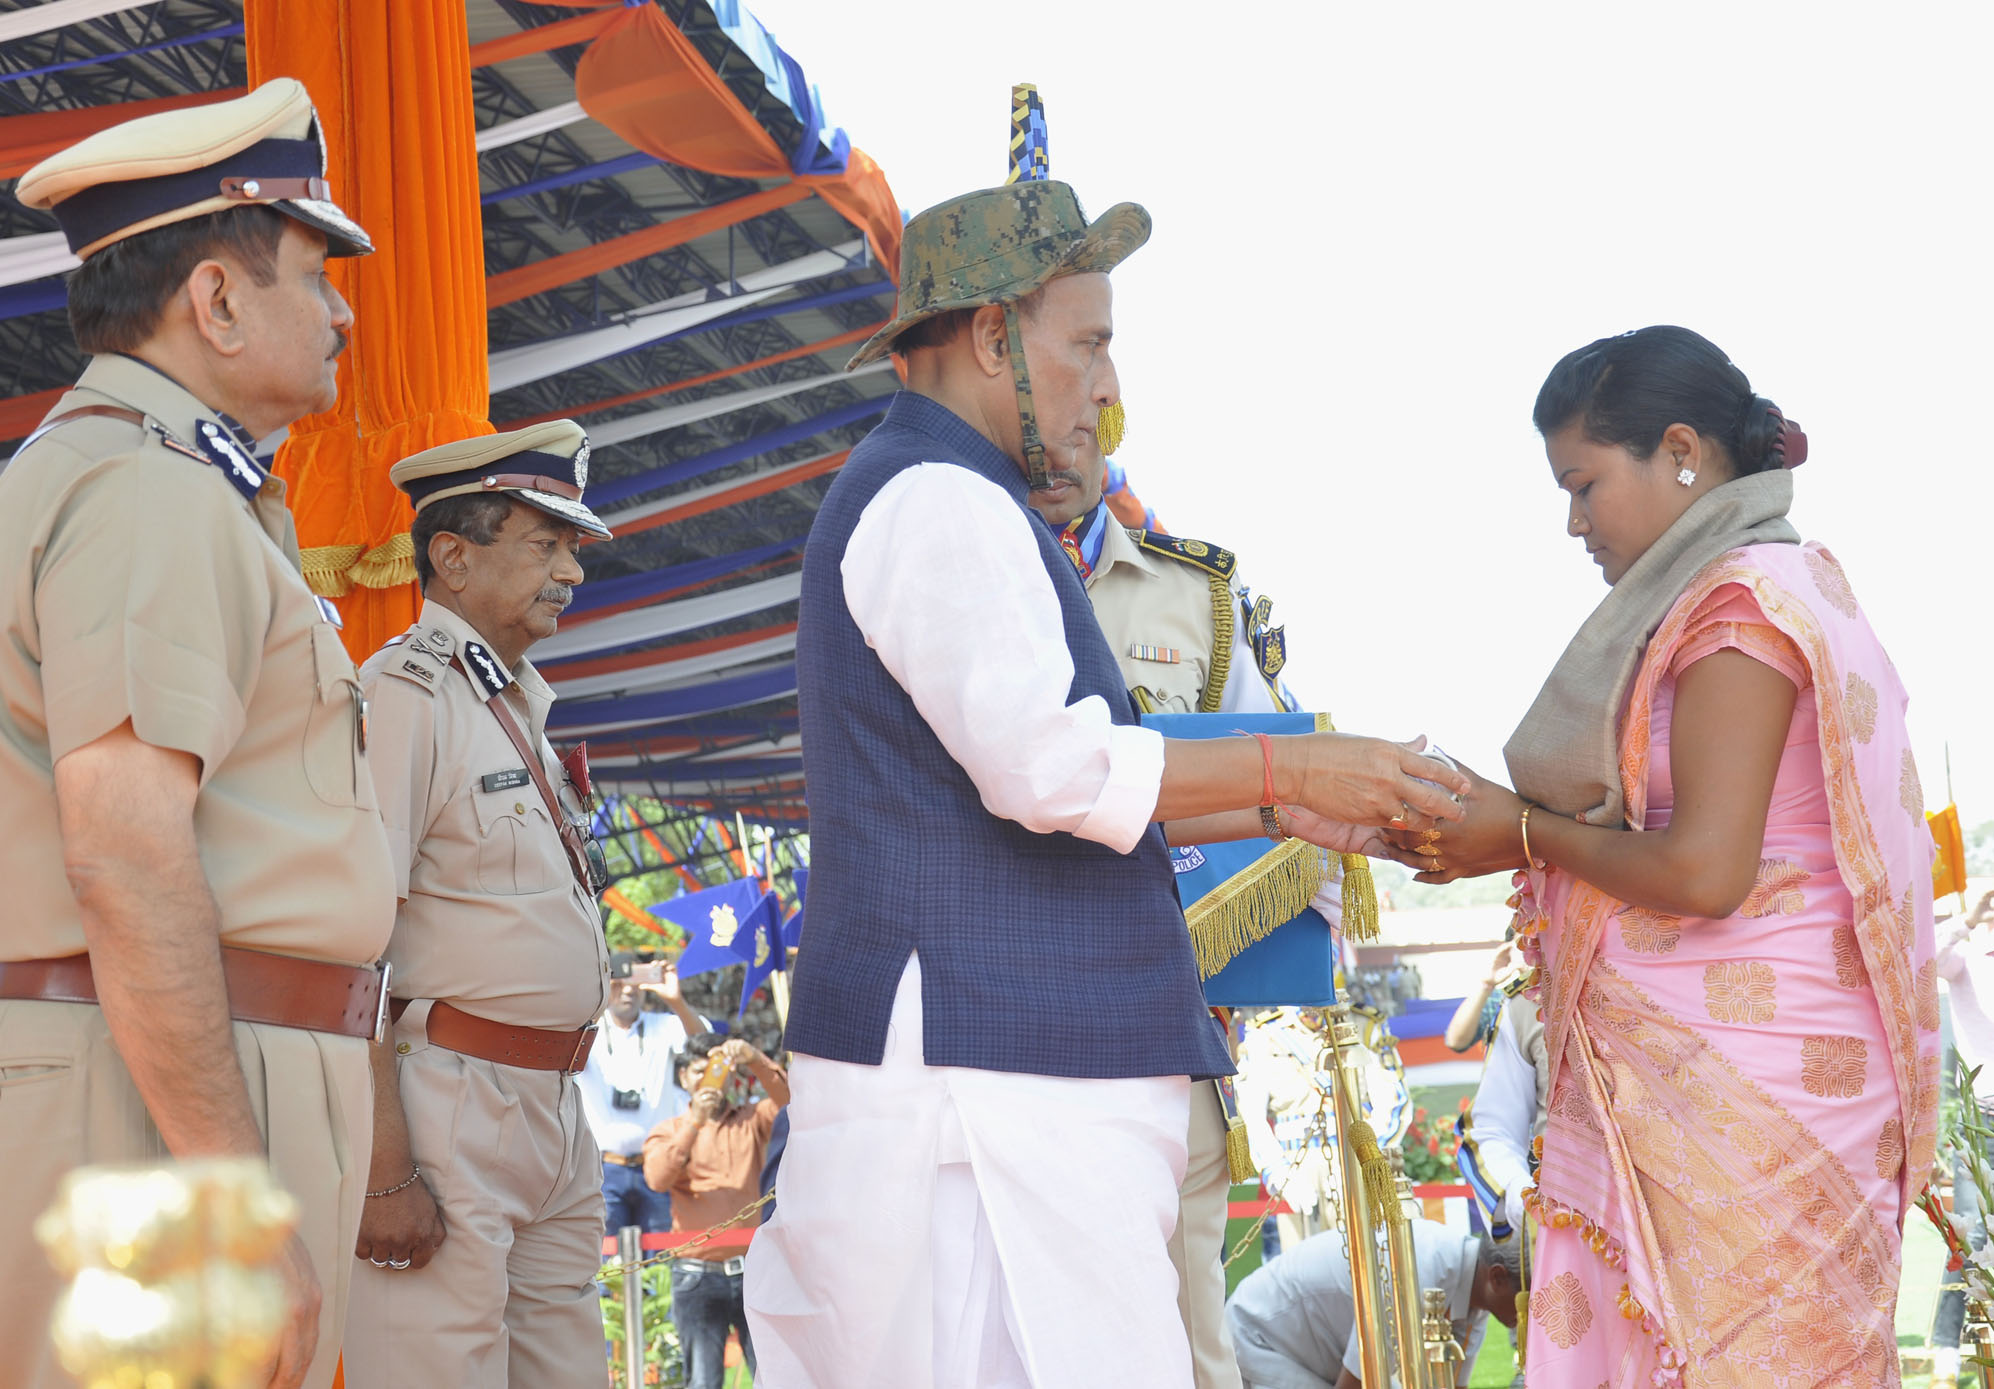 The Union Home Minister, Shri Rajnath Singh presenting Police Medals for Gallantry on the occasion of CRPFs 79th Raising Day Parade, in Gurugram, Haryana in March 24, 2018.